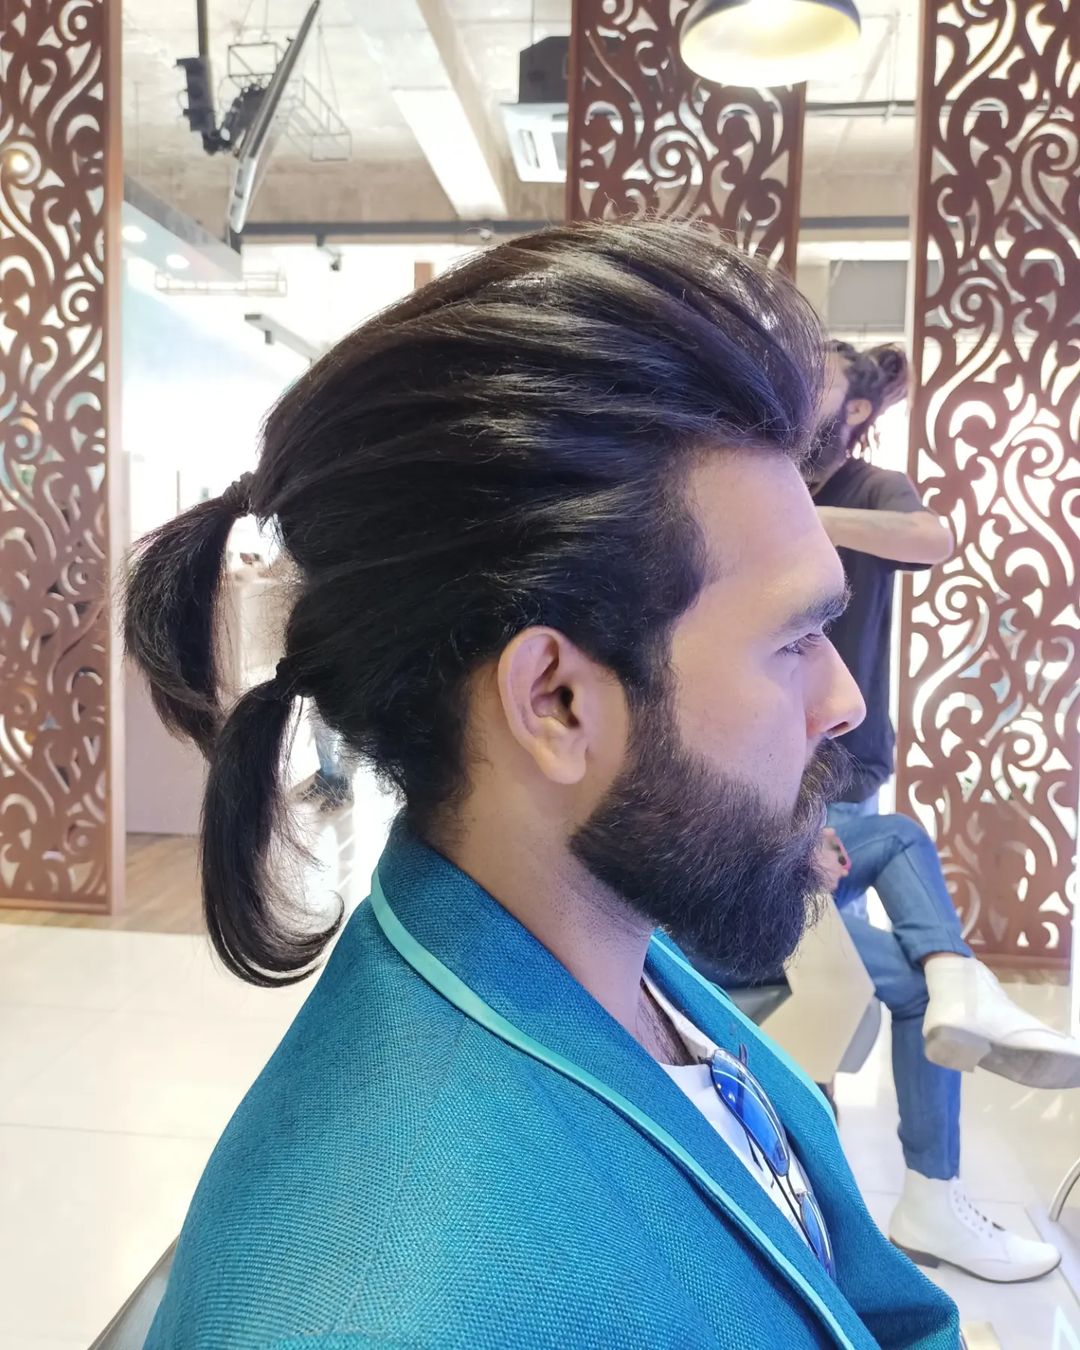 ponytail hairstyle for men 37 Black male ponytail hairstyles | Male ponytail with Bangs | Mens ponytail with fade Ponytail Hairstyles for Men